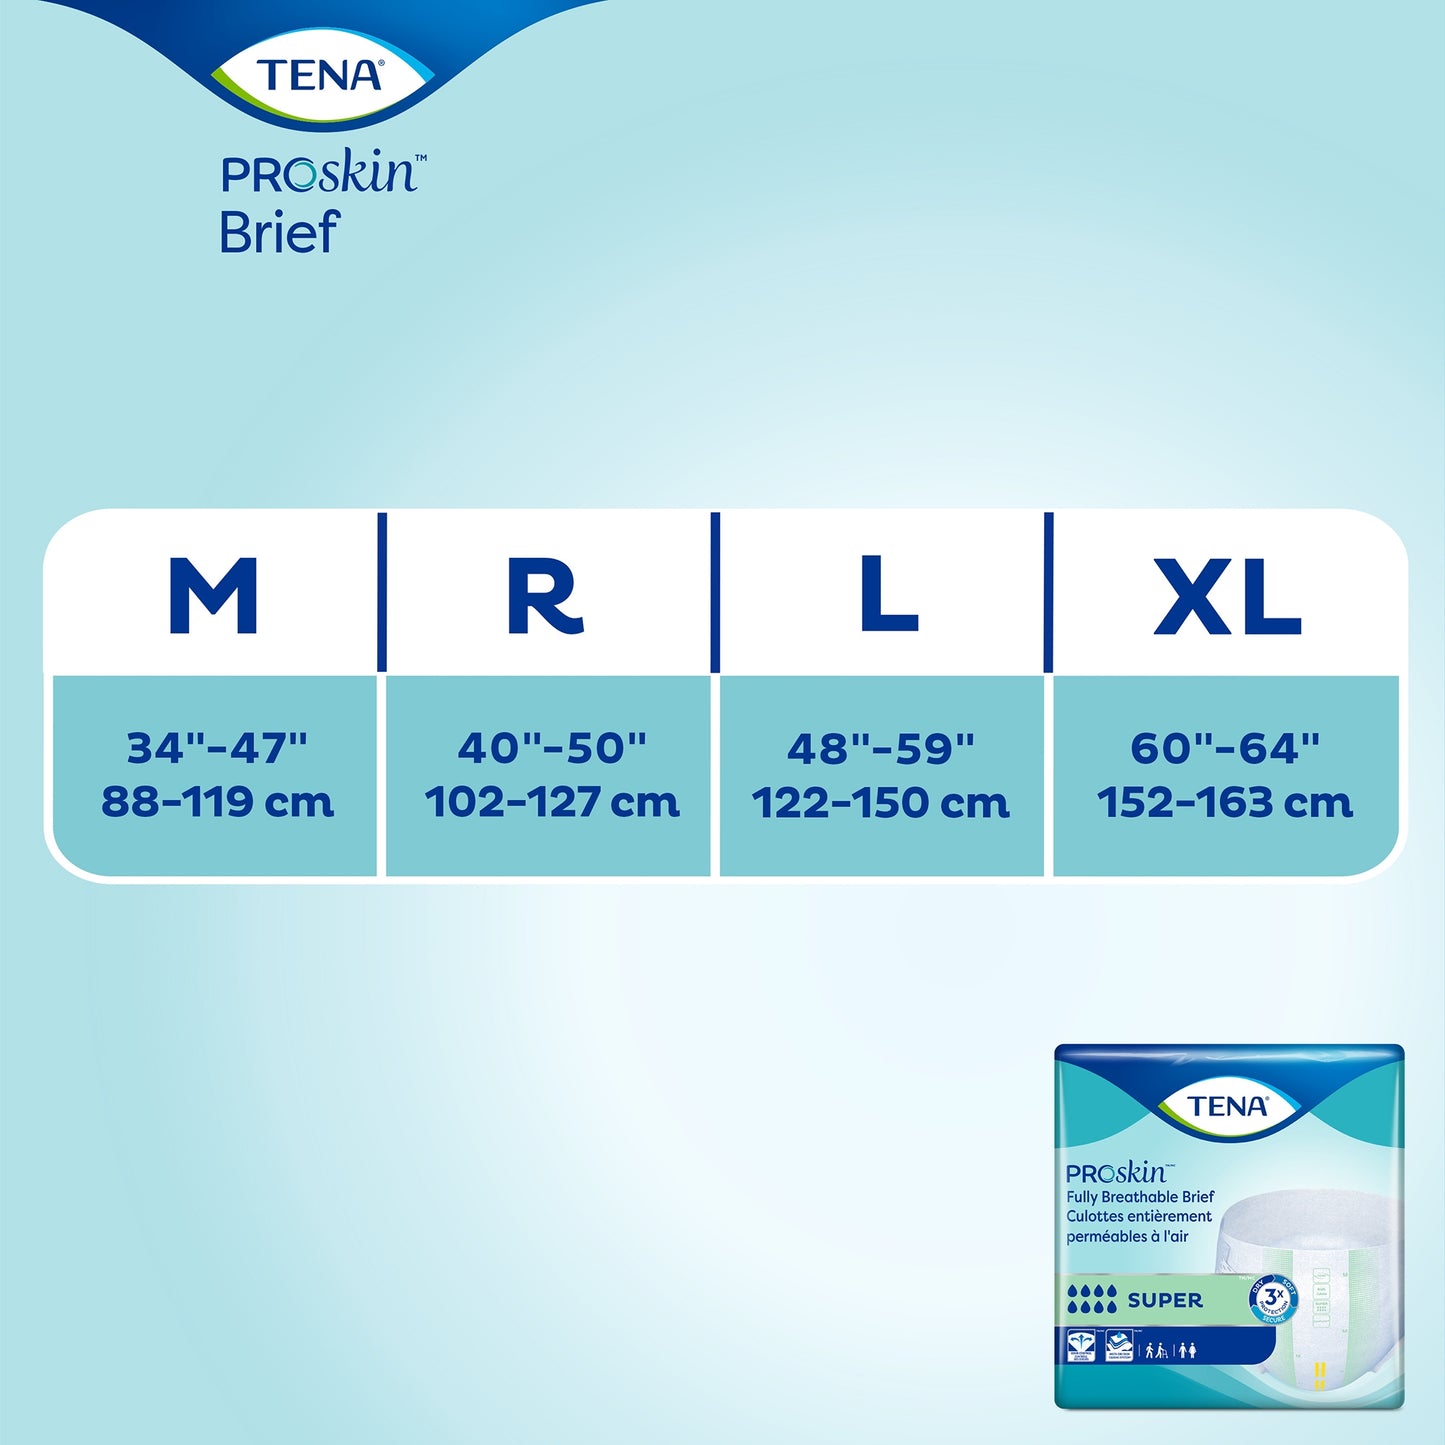 TENA Super Adult Heavy-Absorbent Incontinence Brief, X-large, 60" to 64" Waist / Hip - 68011